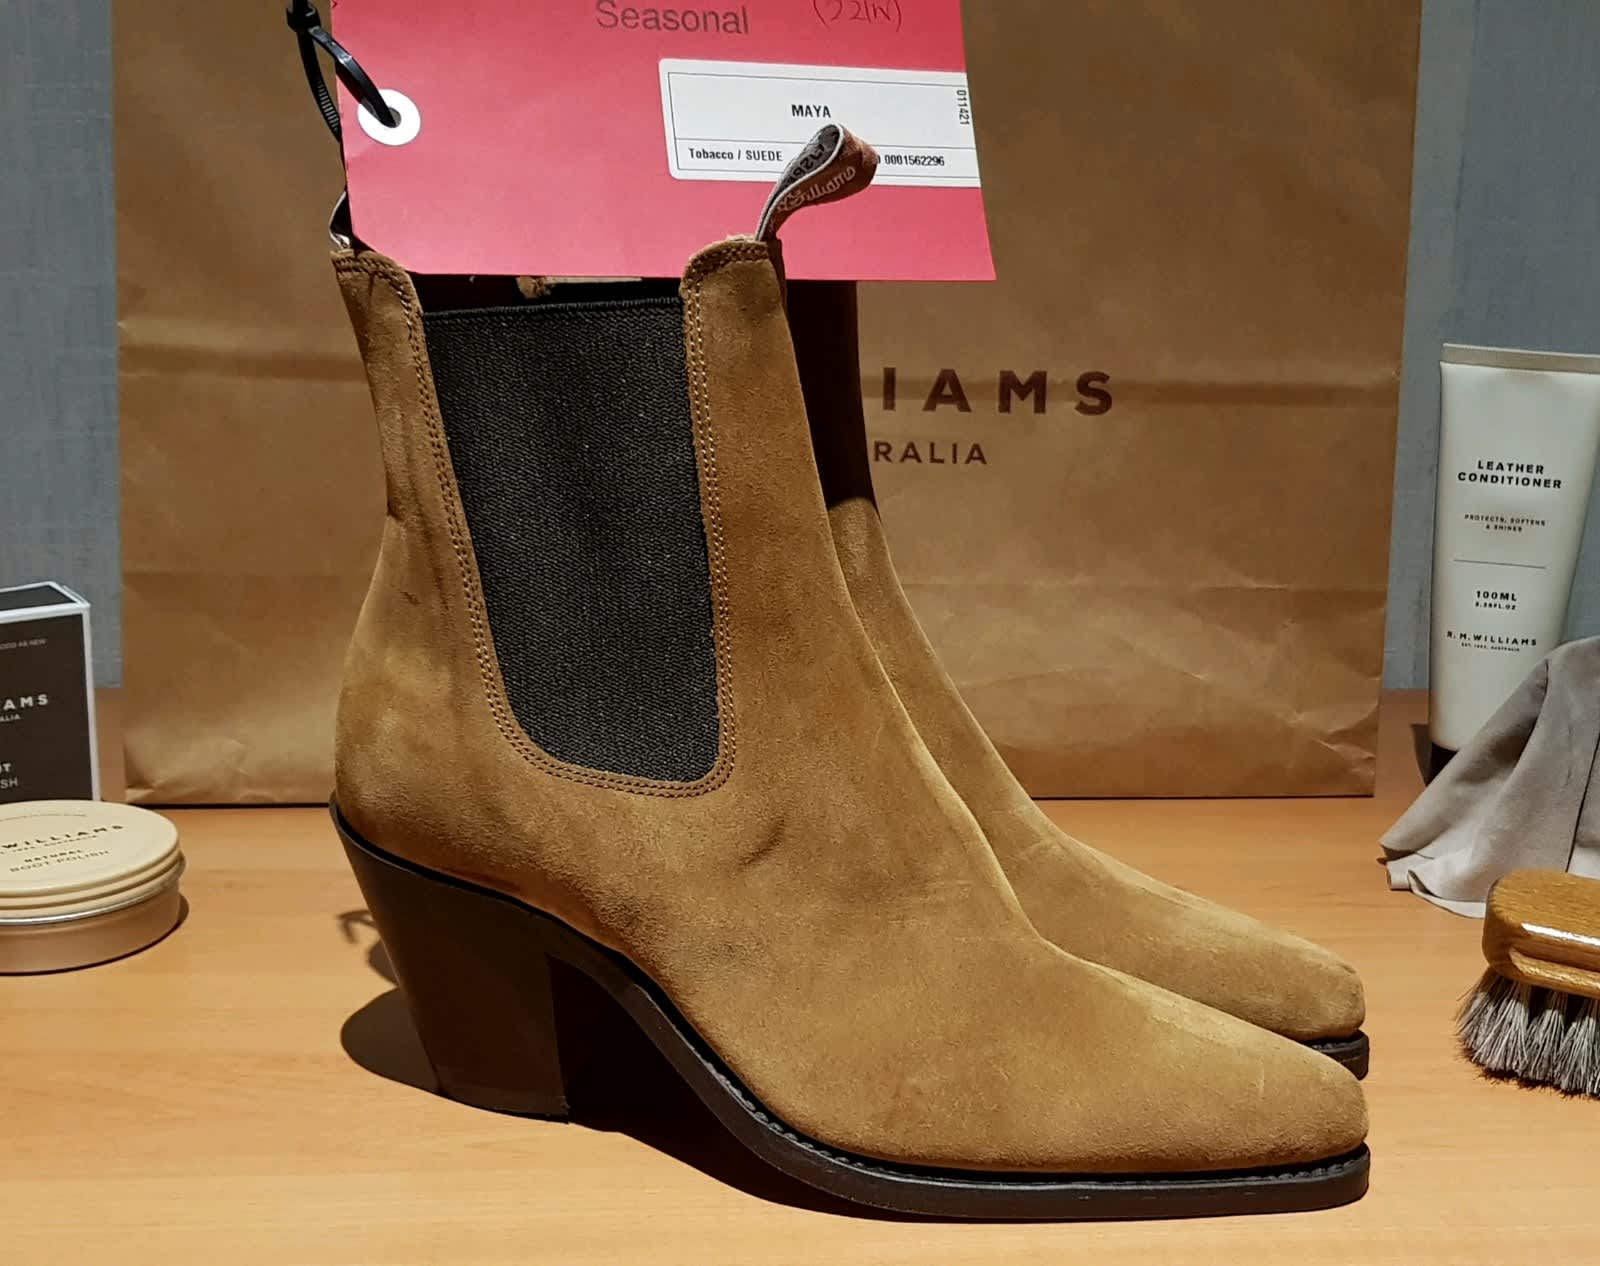 R.M.Williams - Our new season women's boot, the Rosanna, in